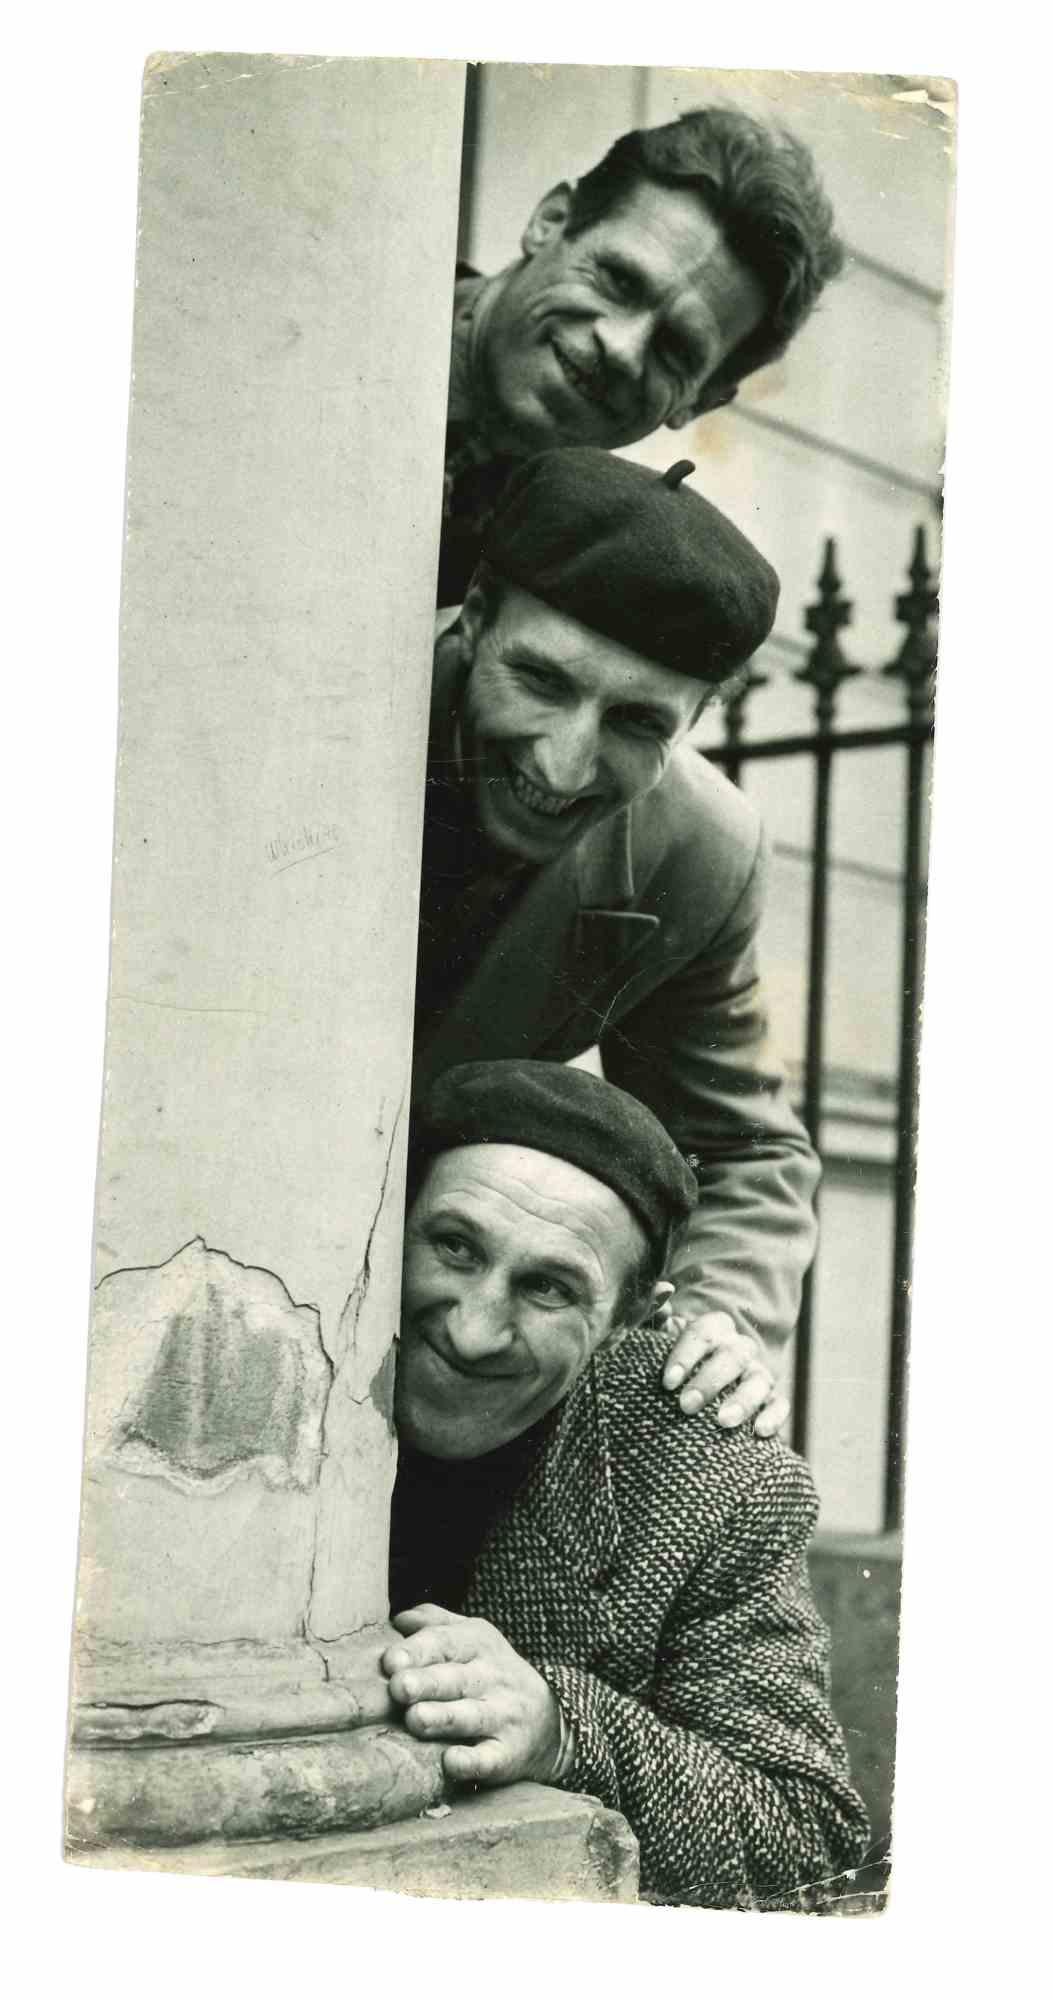 Unknown Figurative Photograph - Life In Italy 1960s - Historical Photos -1960s